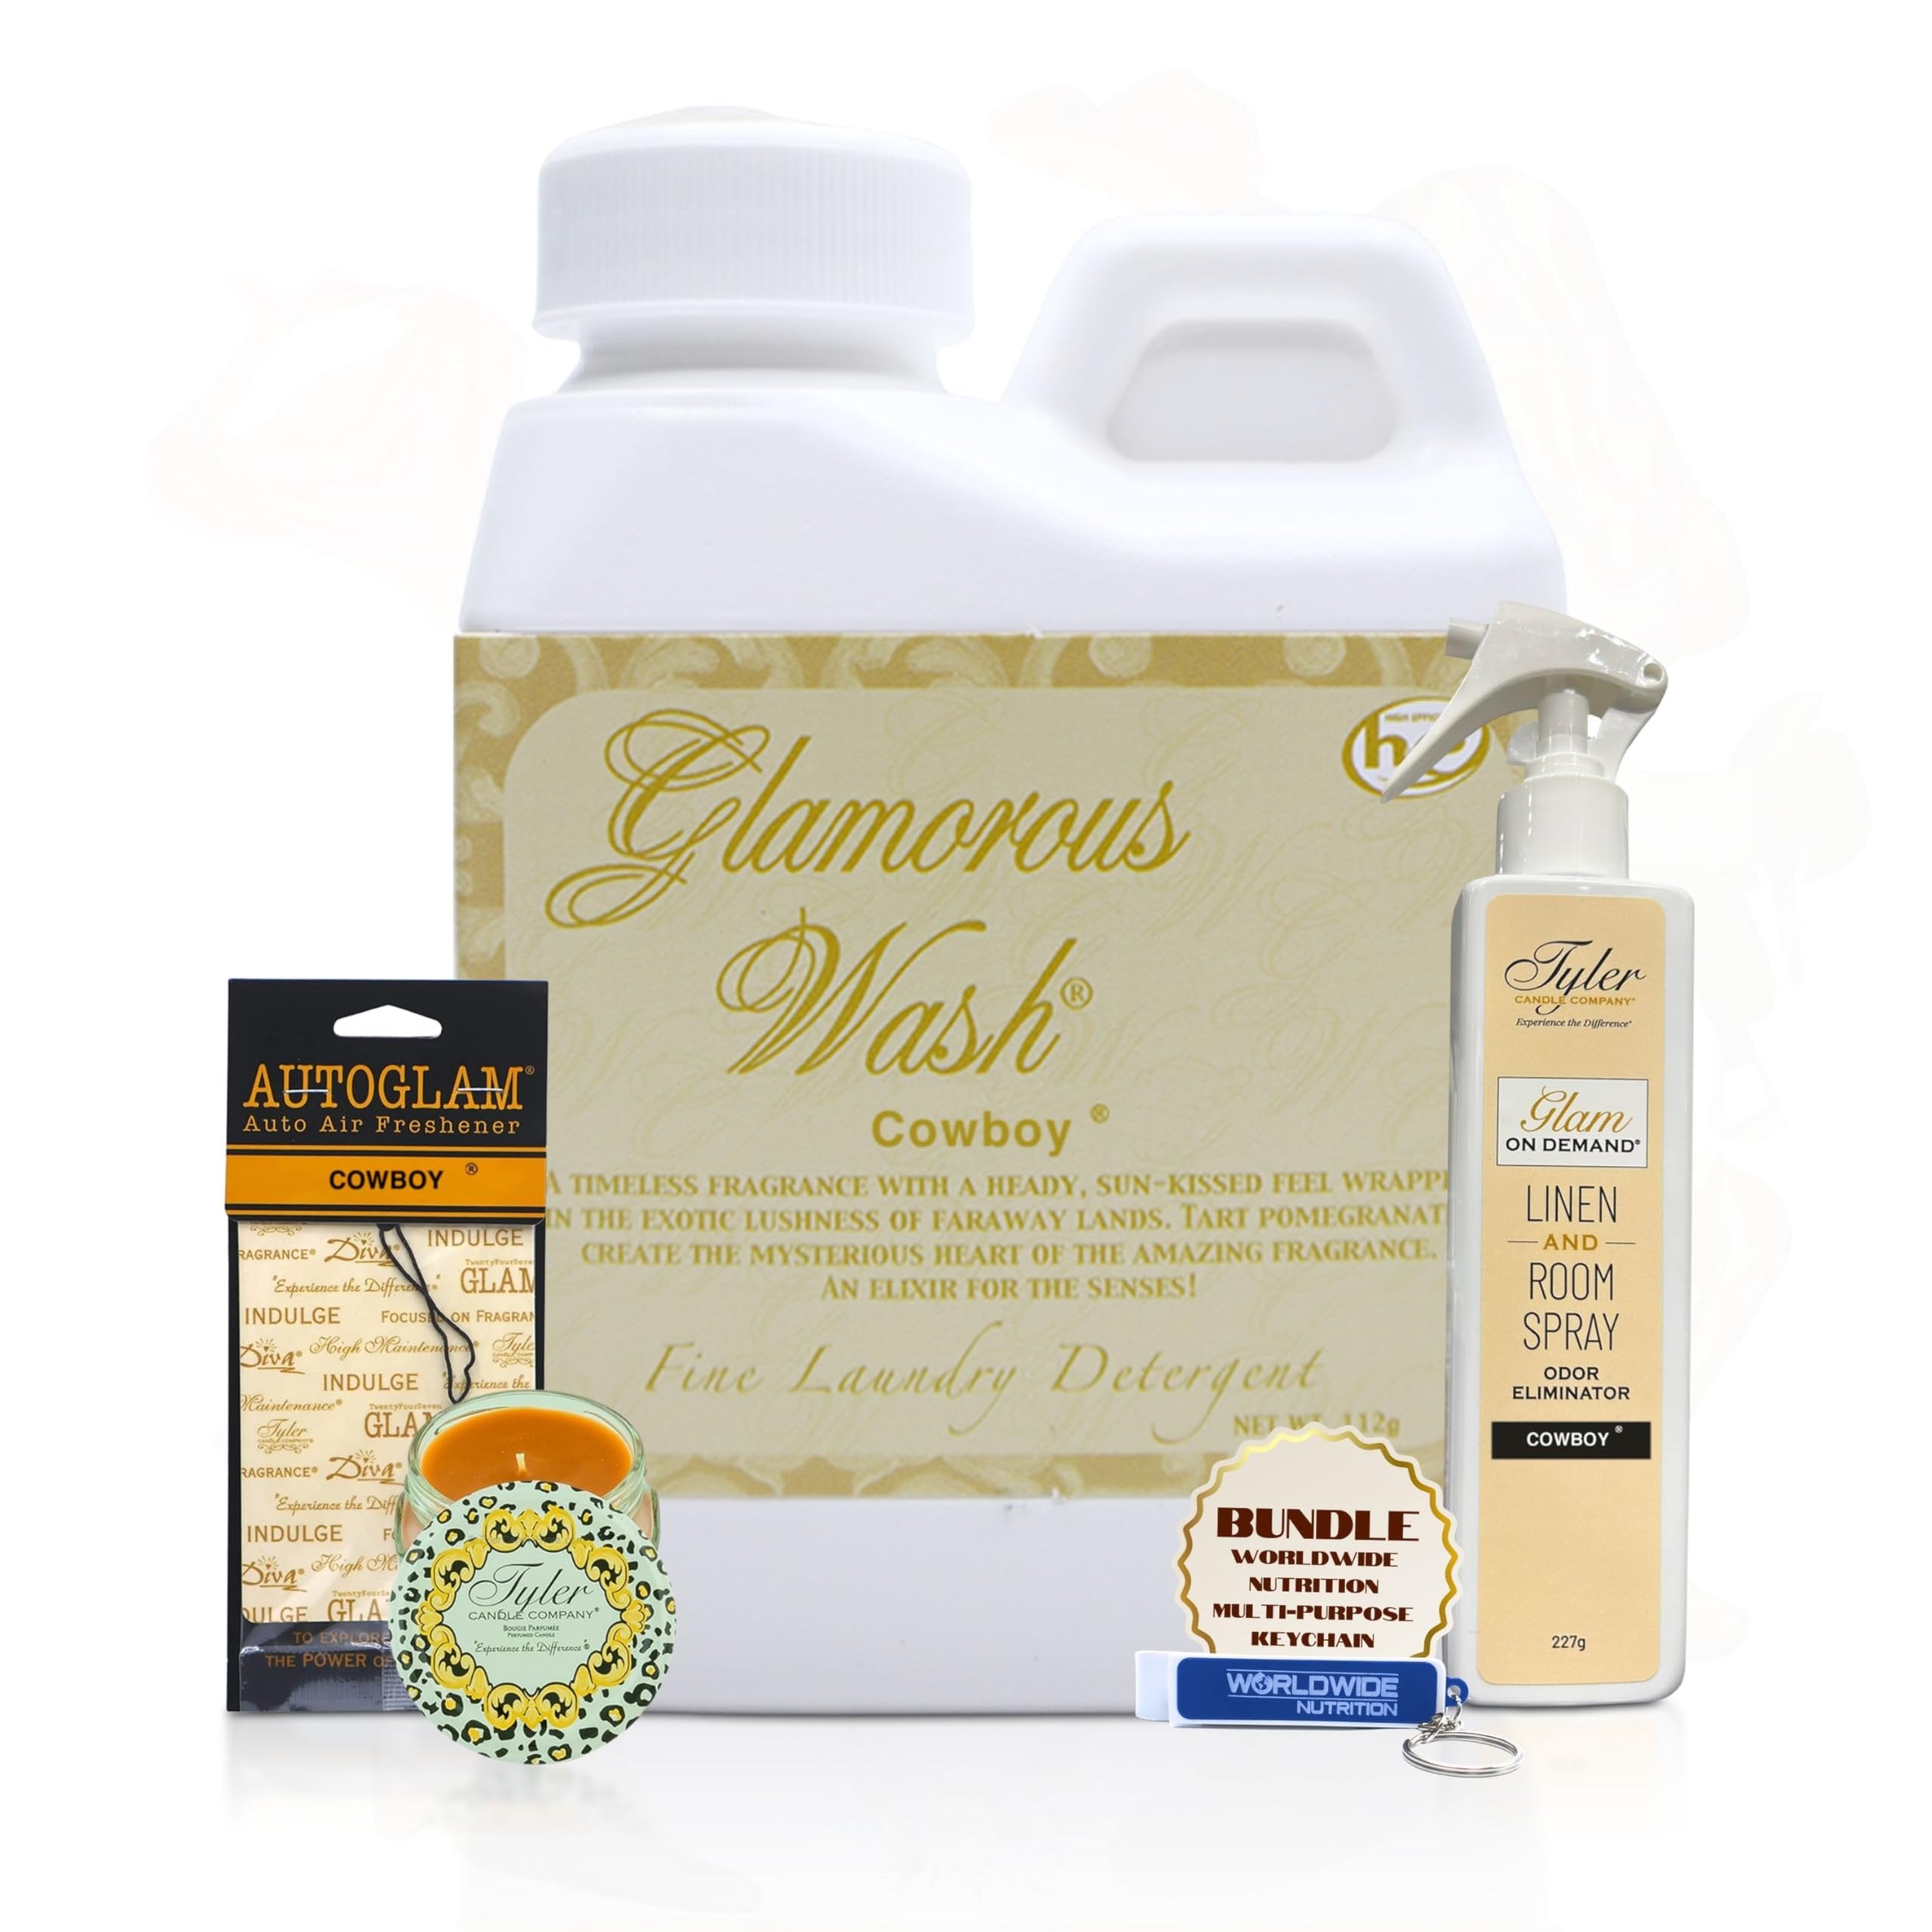 Tyler Candle Company Glamorous Gift Suite VI Cowboy - Glam On Demand Linen and Room Spray Bottle, Prestige Candle, Glamorous Wash Laundry Detergent, Autoglam Auto Air Freshener & Keychain